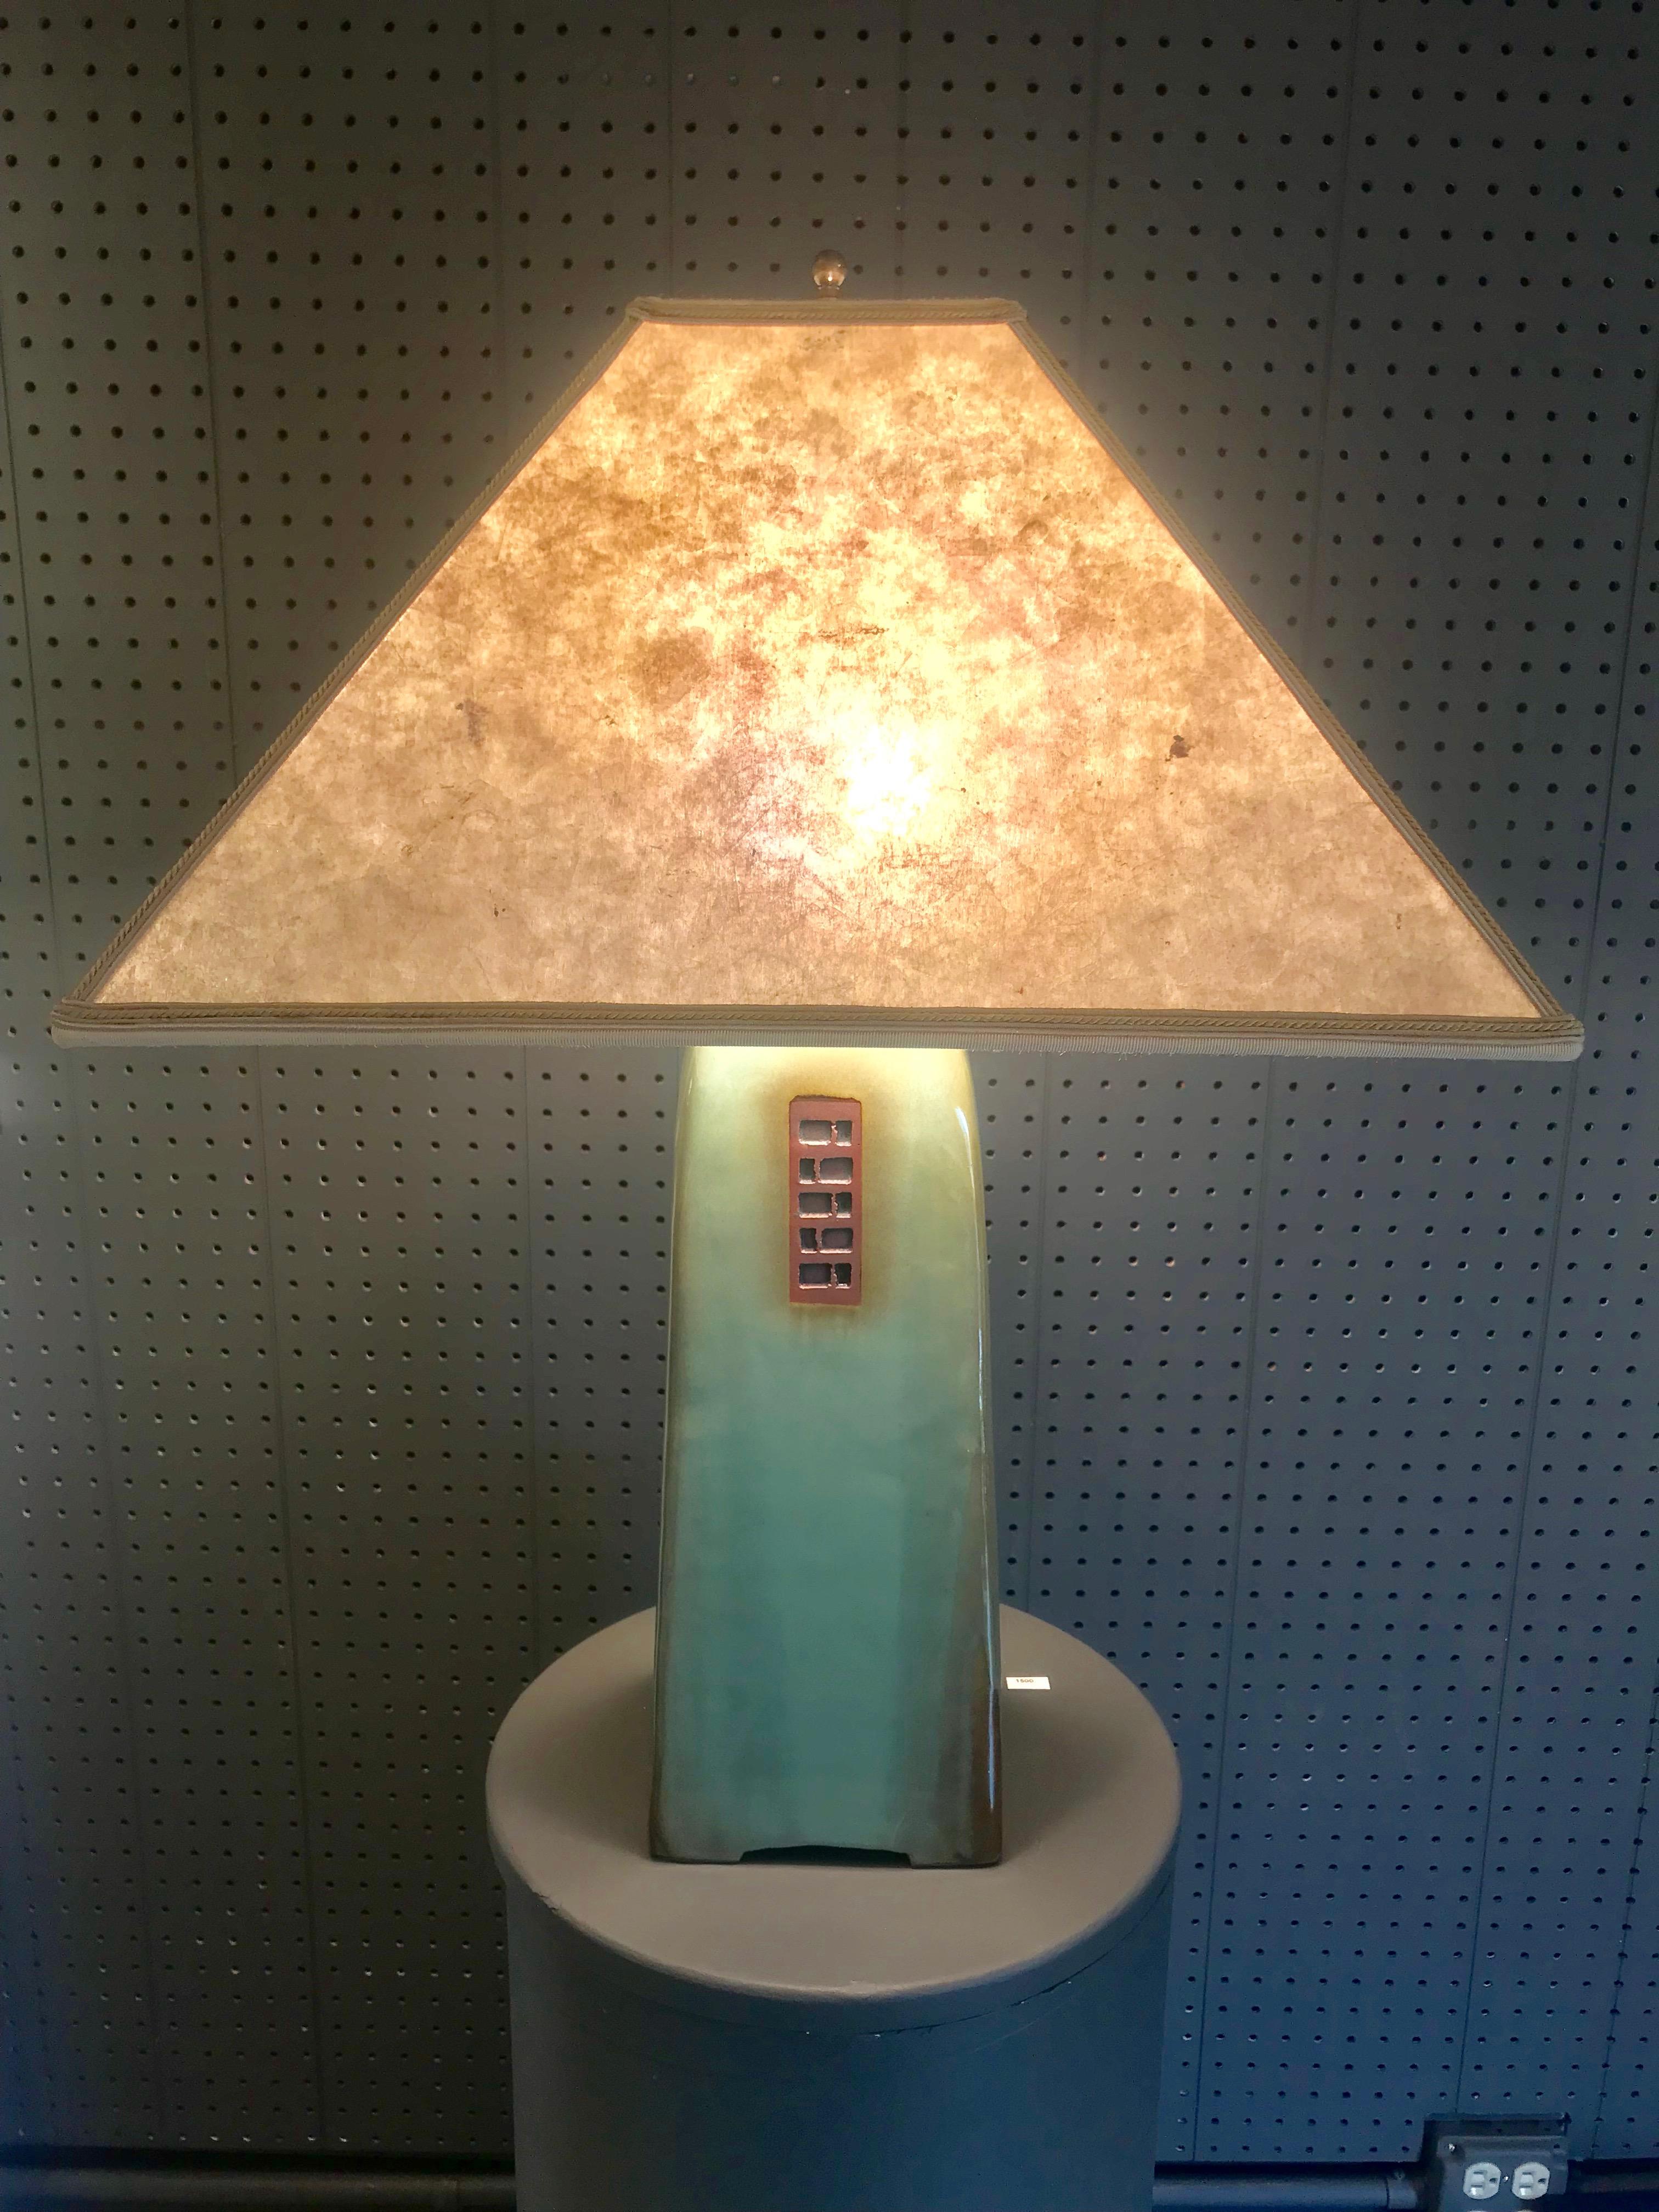 Gorgeous 26 inch high North Union Collection lamp in celadon glaze with silver mica shade by renowned artist Jim Webb. There are beautiful decorative brown geometric decorations and indentations.
Dimensions: Footprint: 6 x 6 
Height of base